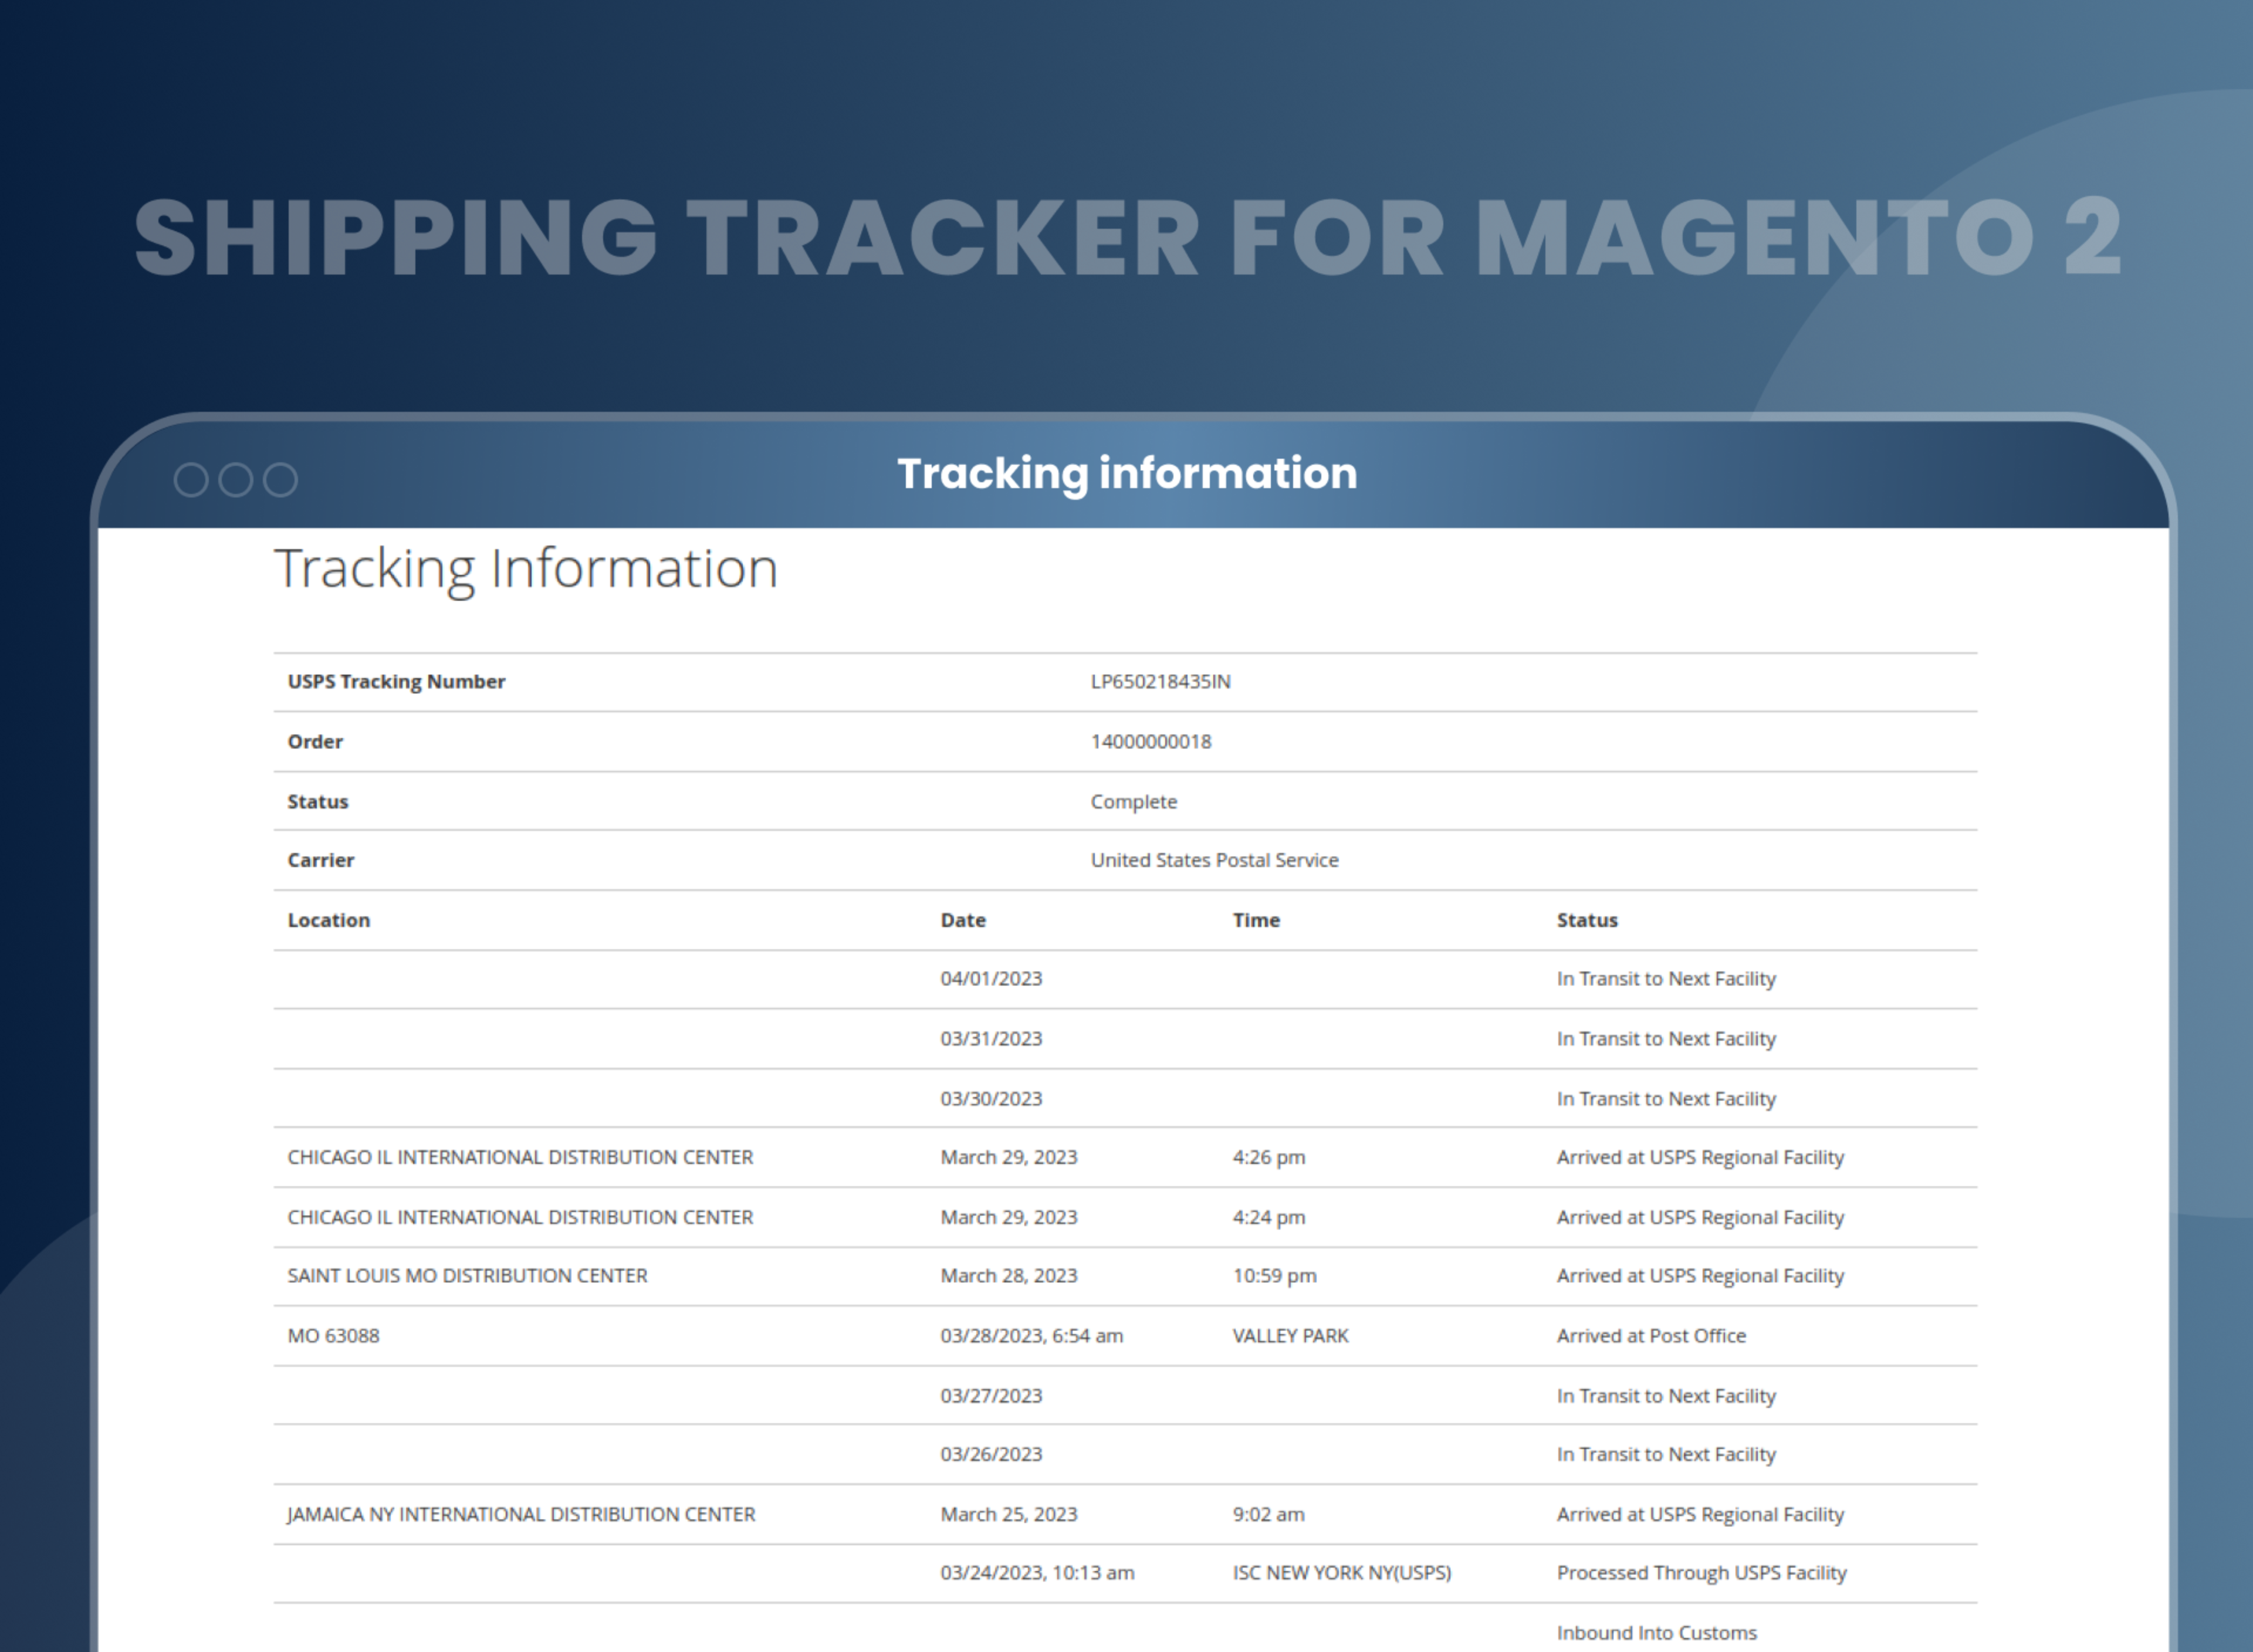 Tracking information